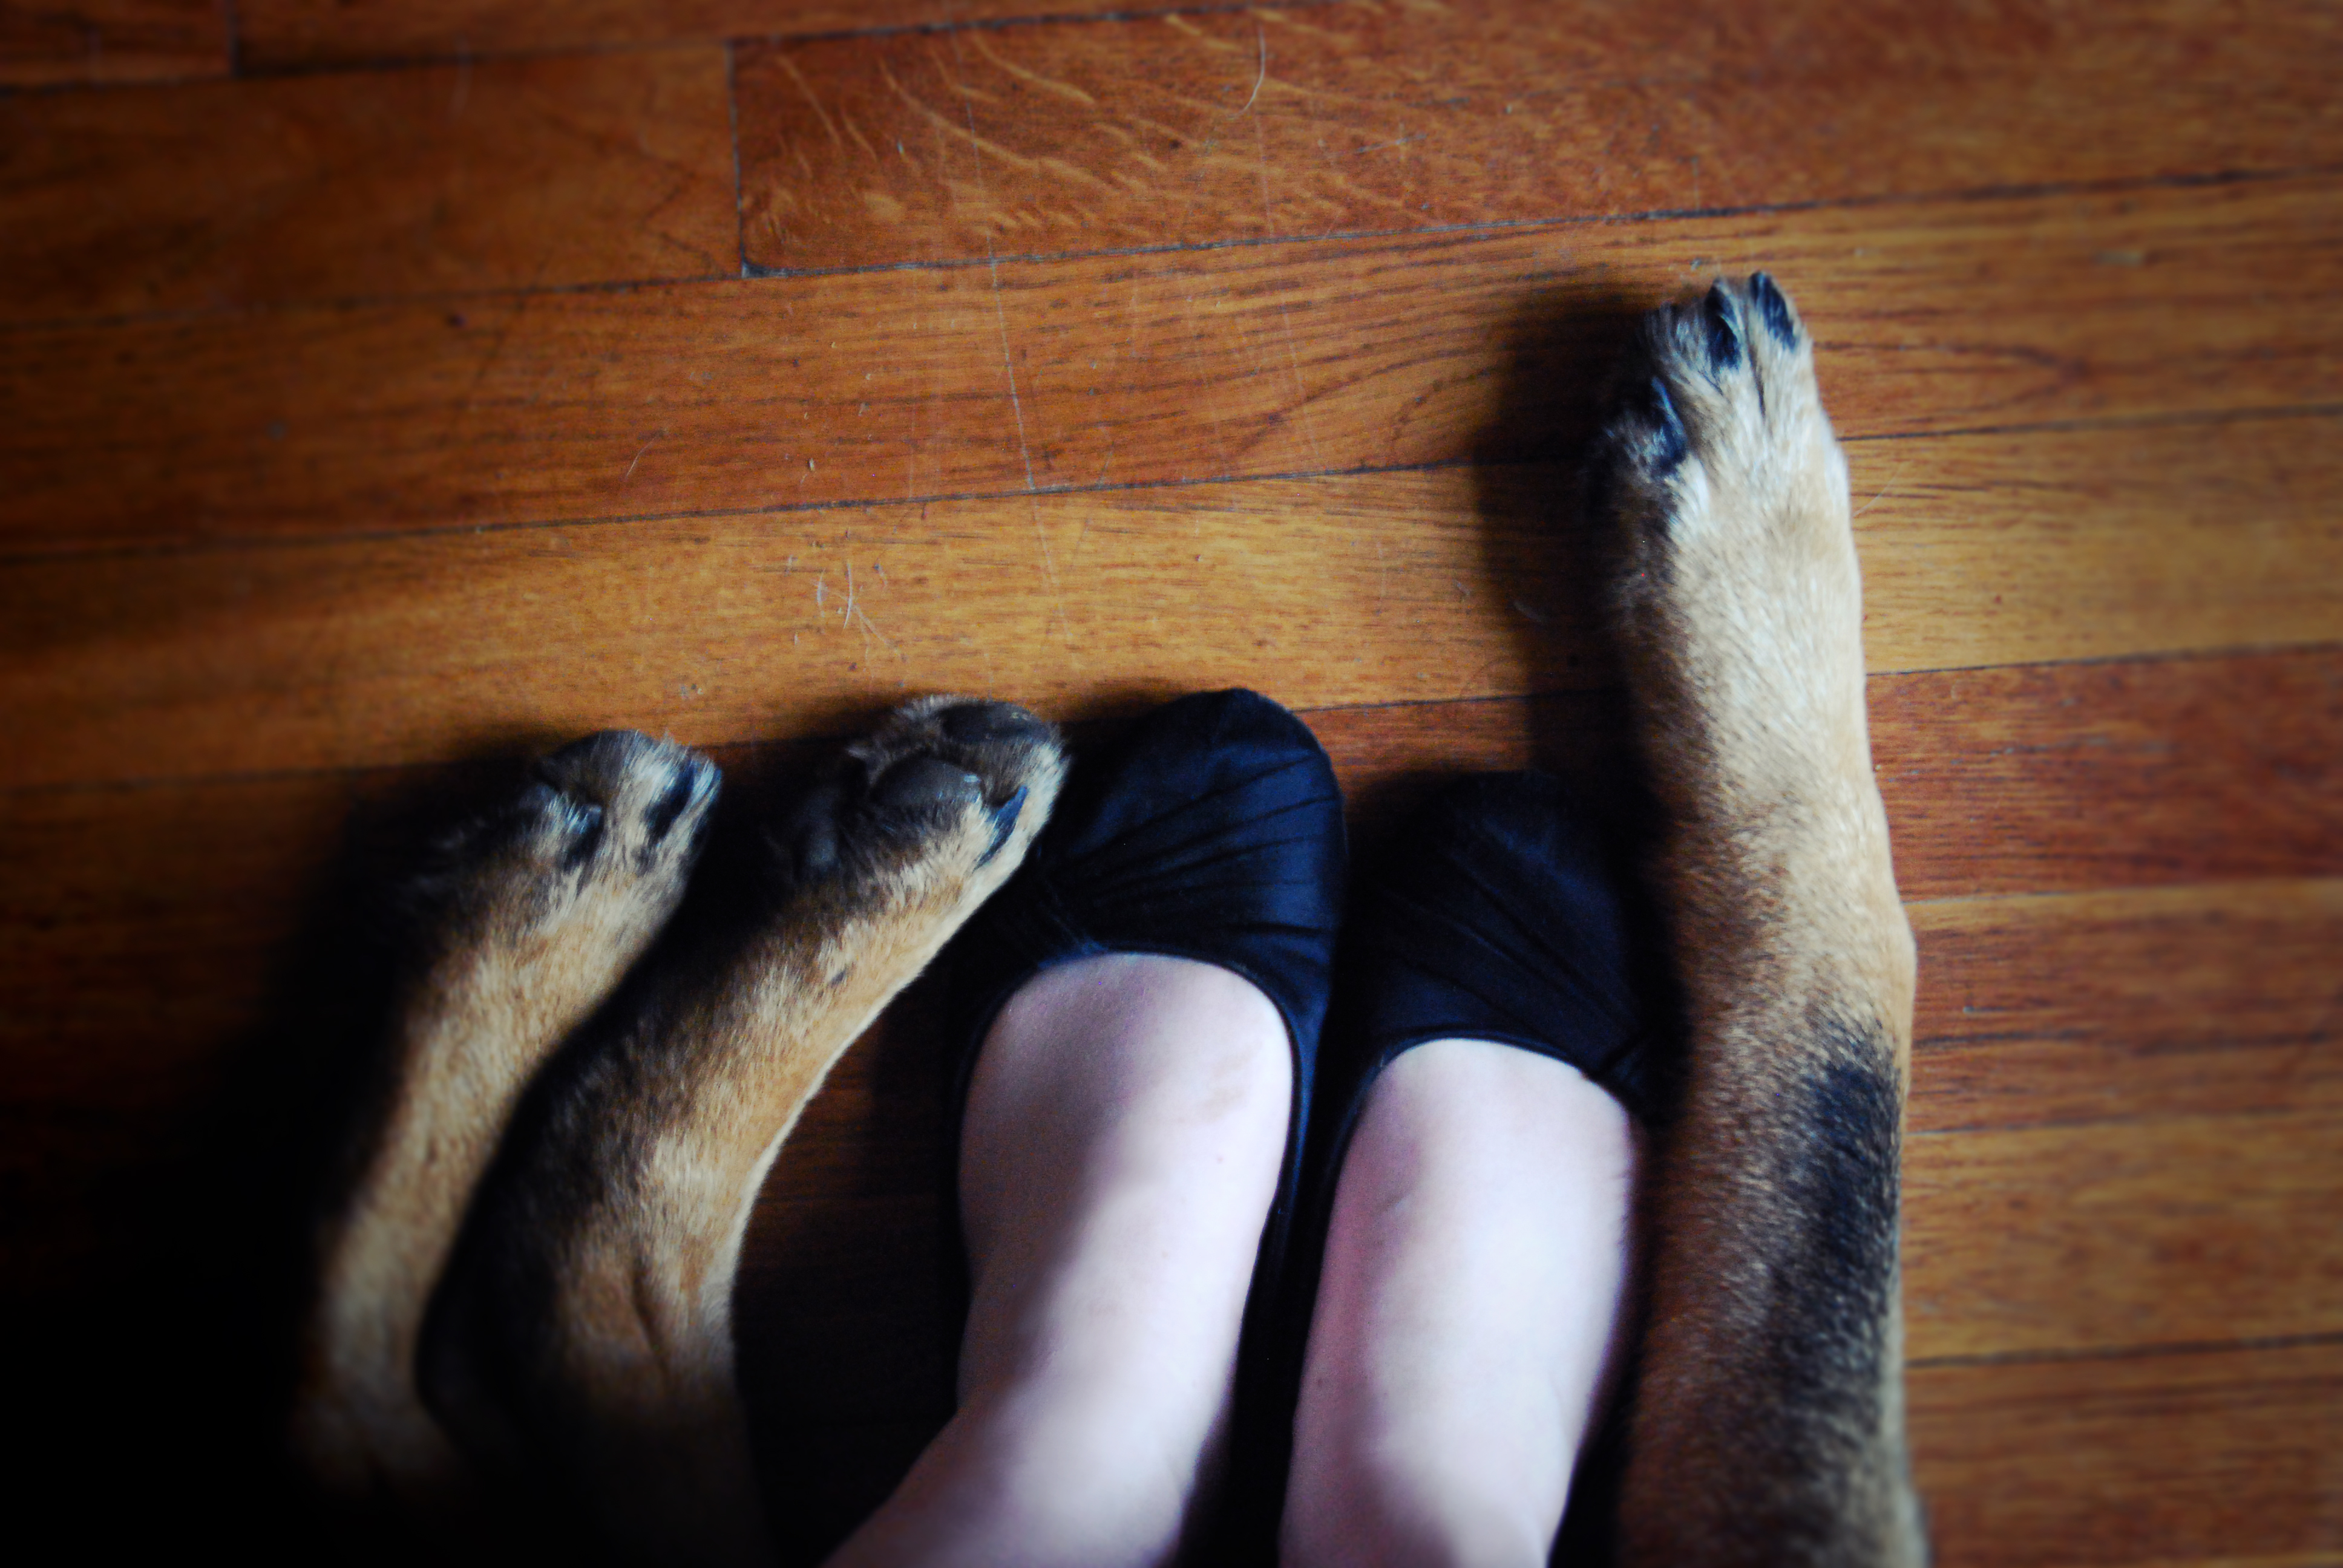 looking down on a wood floor, at the very bottom edge are a pair of pale white feet in black fabric shoes, around them are two, big back paws and one big front one with brown fur and black toe nails